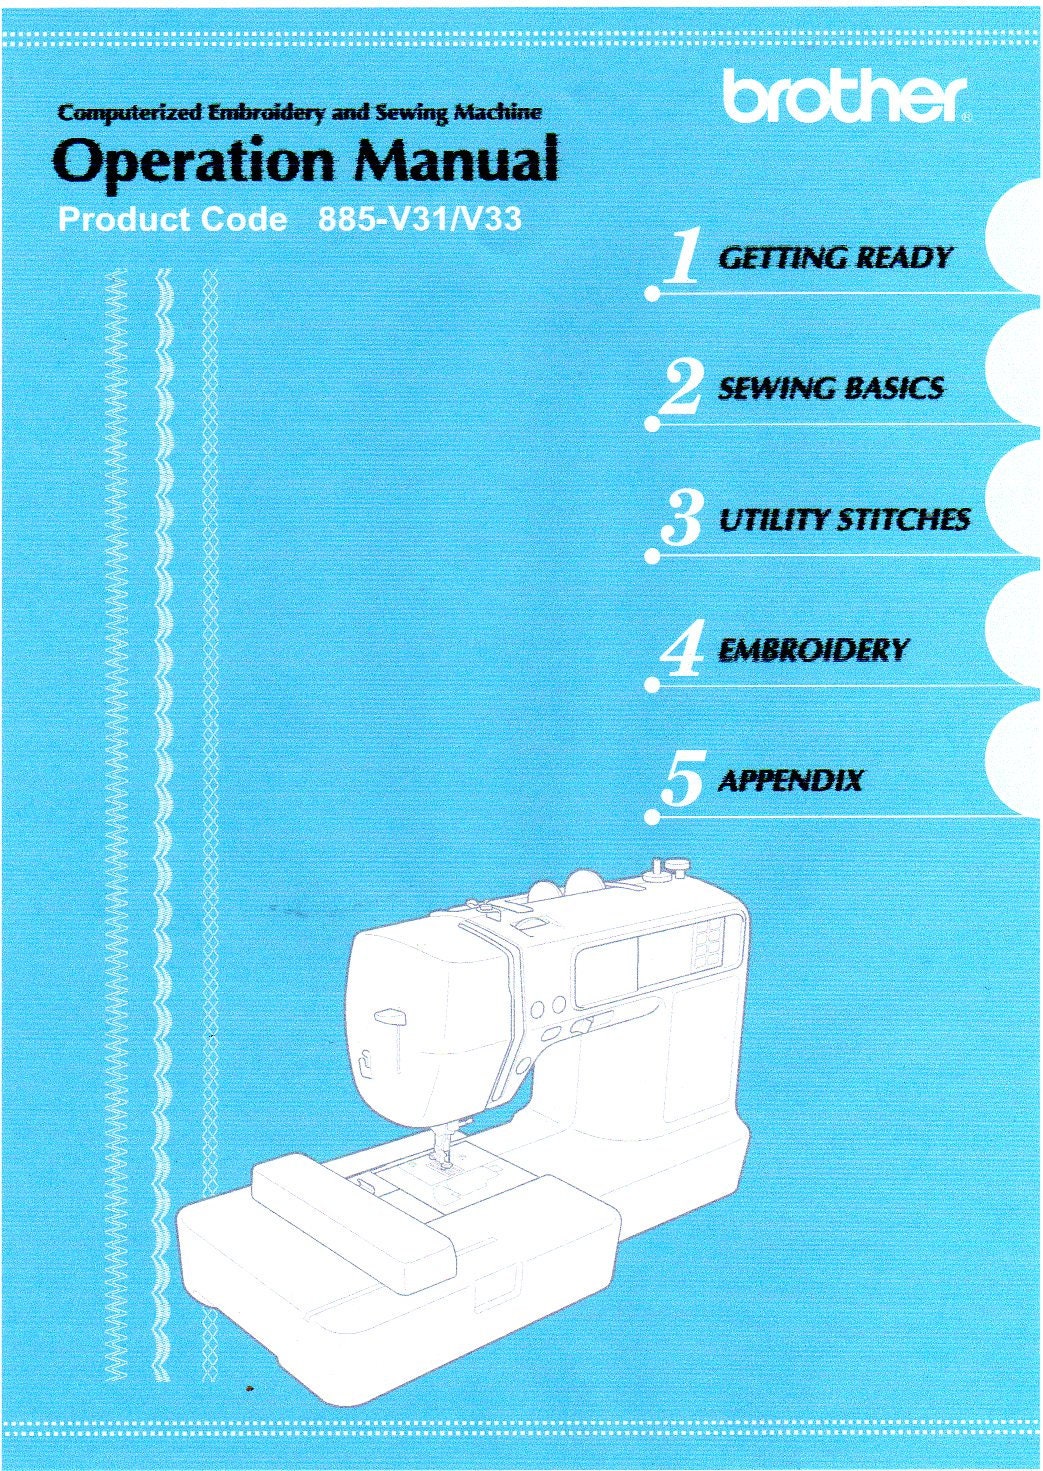 Brother SE400 Combination Computerized Sewing and Embroidery Machine -SE400